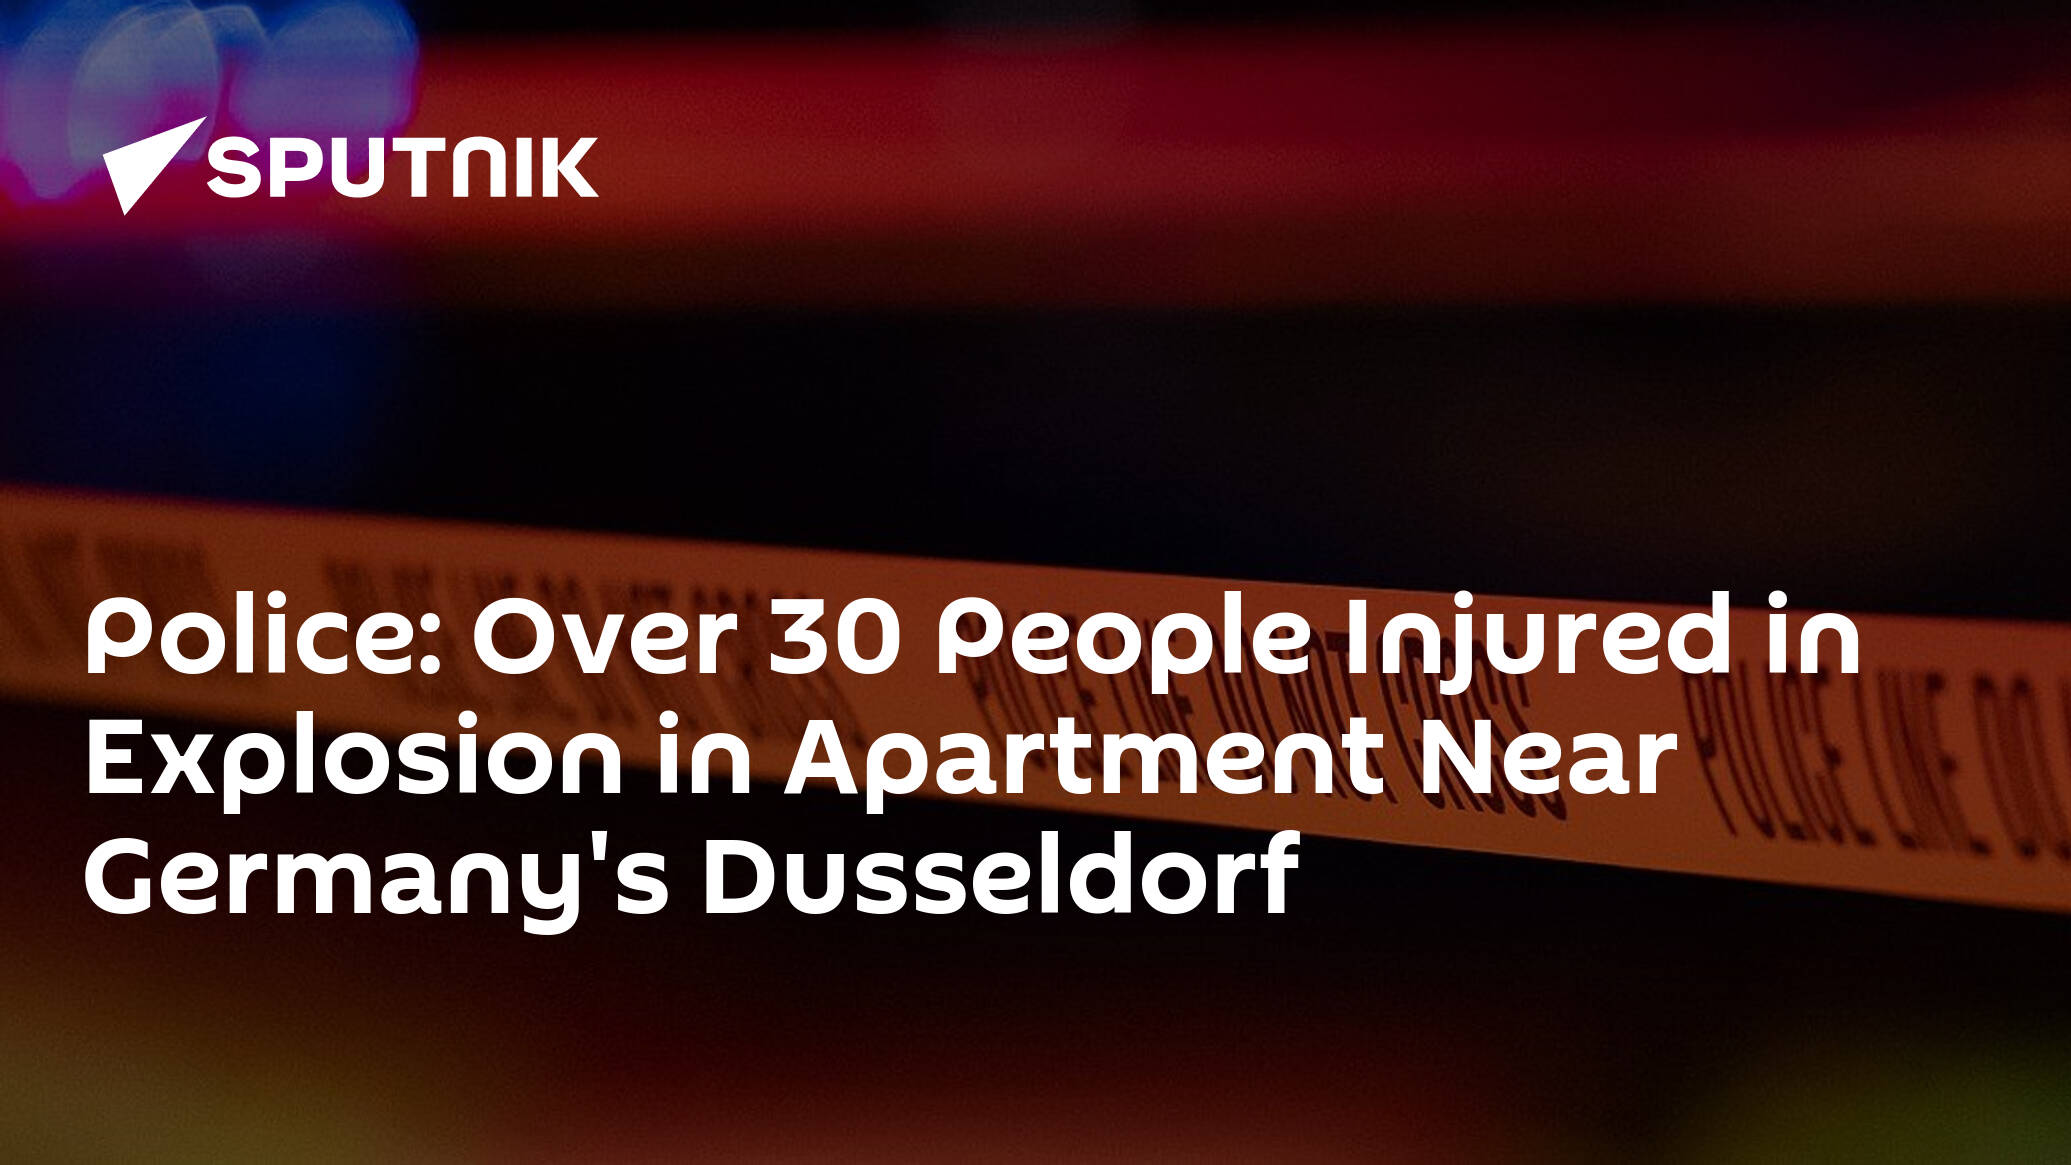 Police: Over 30 People Injured in Explosion in Apartment Near Germany's Dusseldorf